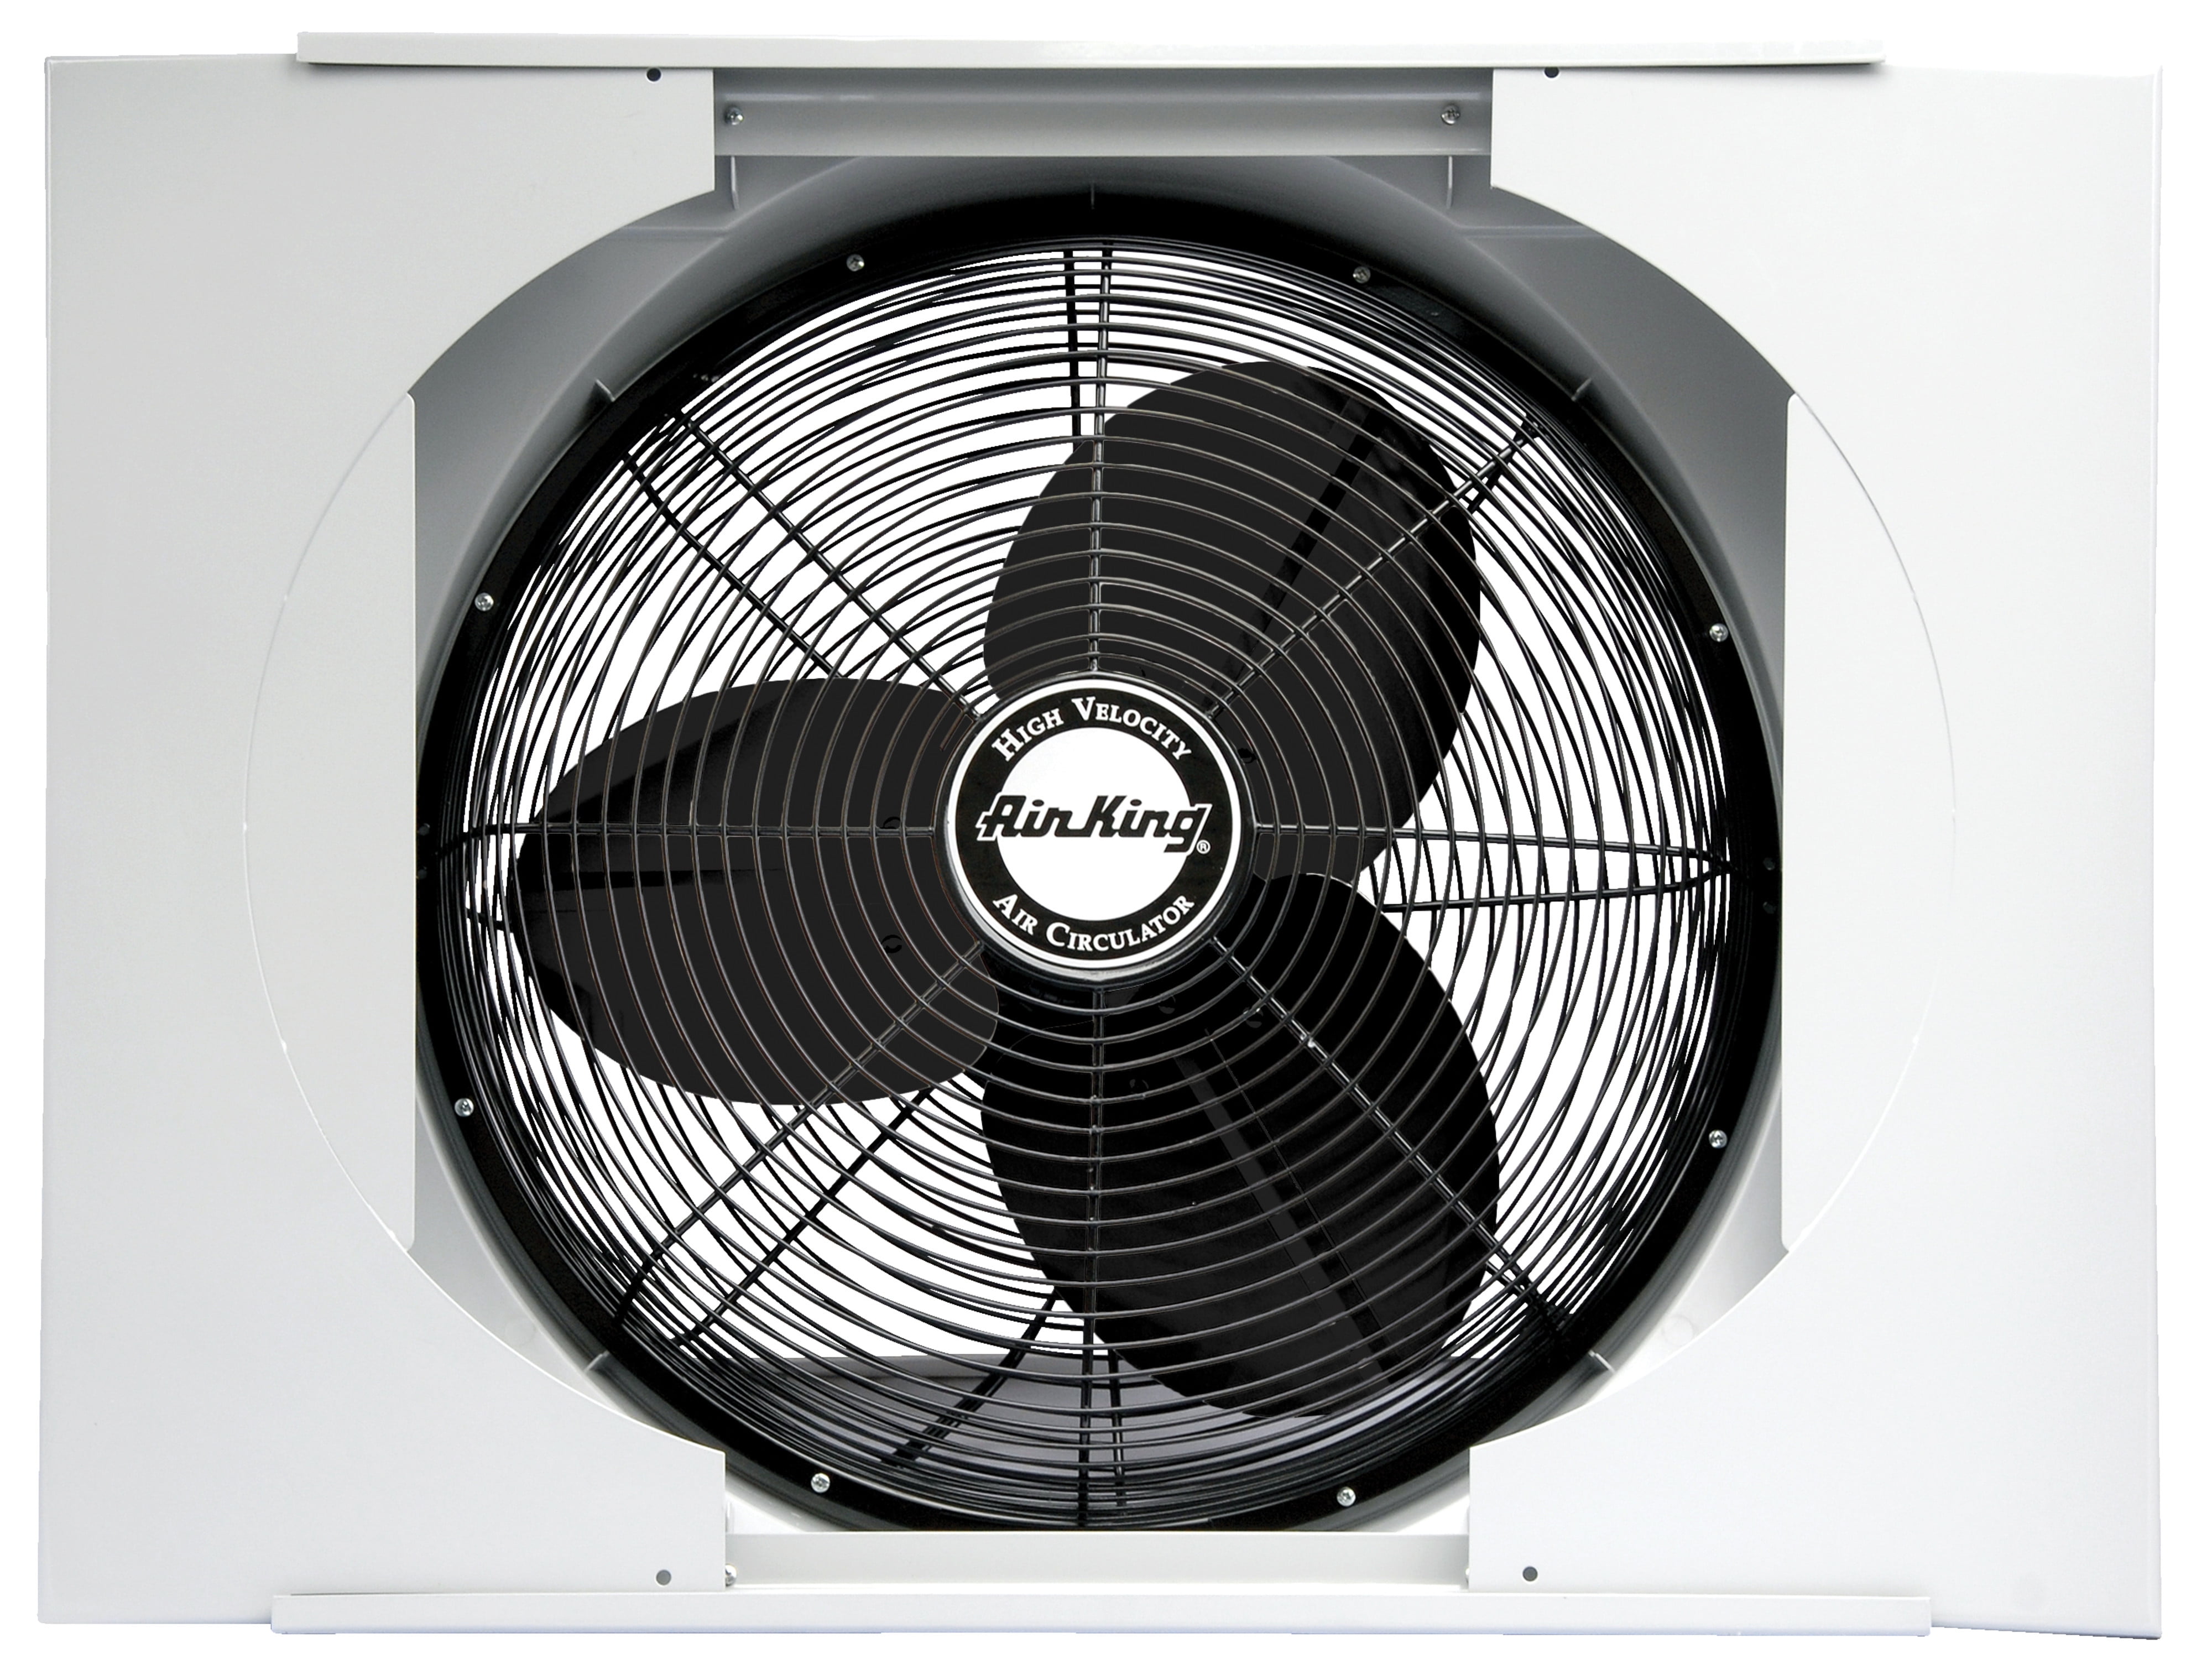 skærm Marquee Et hundrede år Air King 20" Electric Whole House 120V 3 Speed Window Exhaust Fan with  Storm Guard, 9166 - Walmart.com